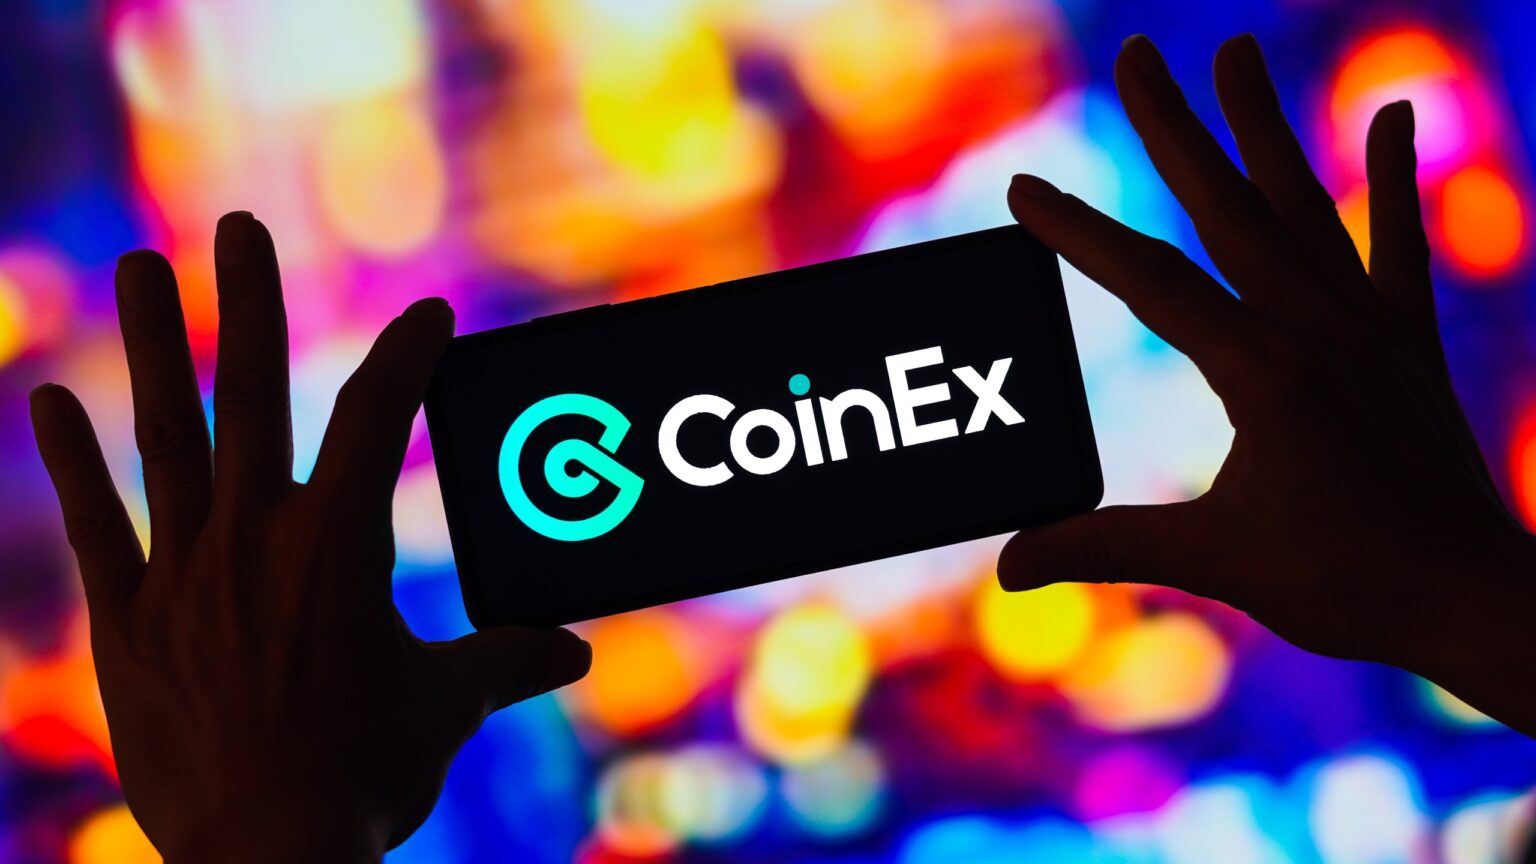 Users Reel as CoinEx is Hacked for Over $53 Million in ETH, TRON, and MATIC